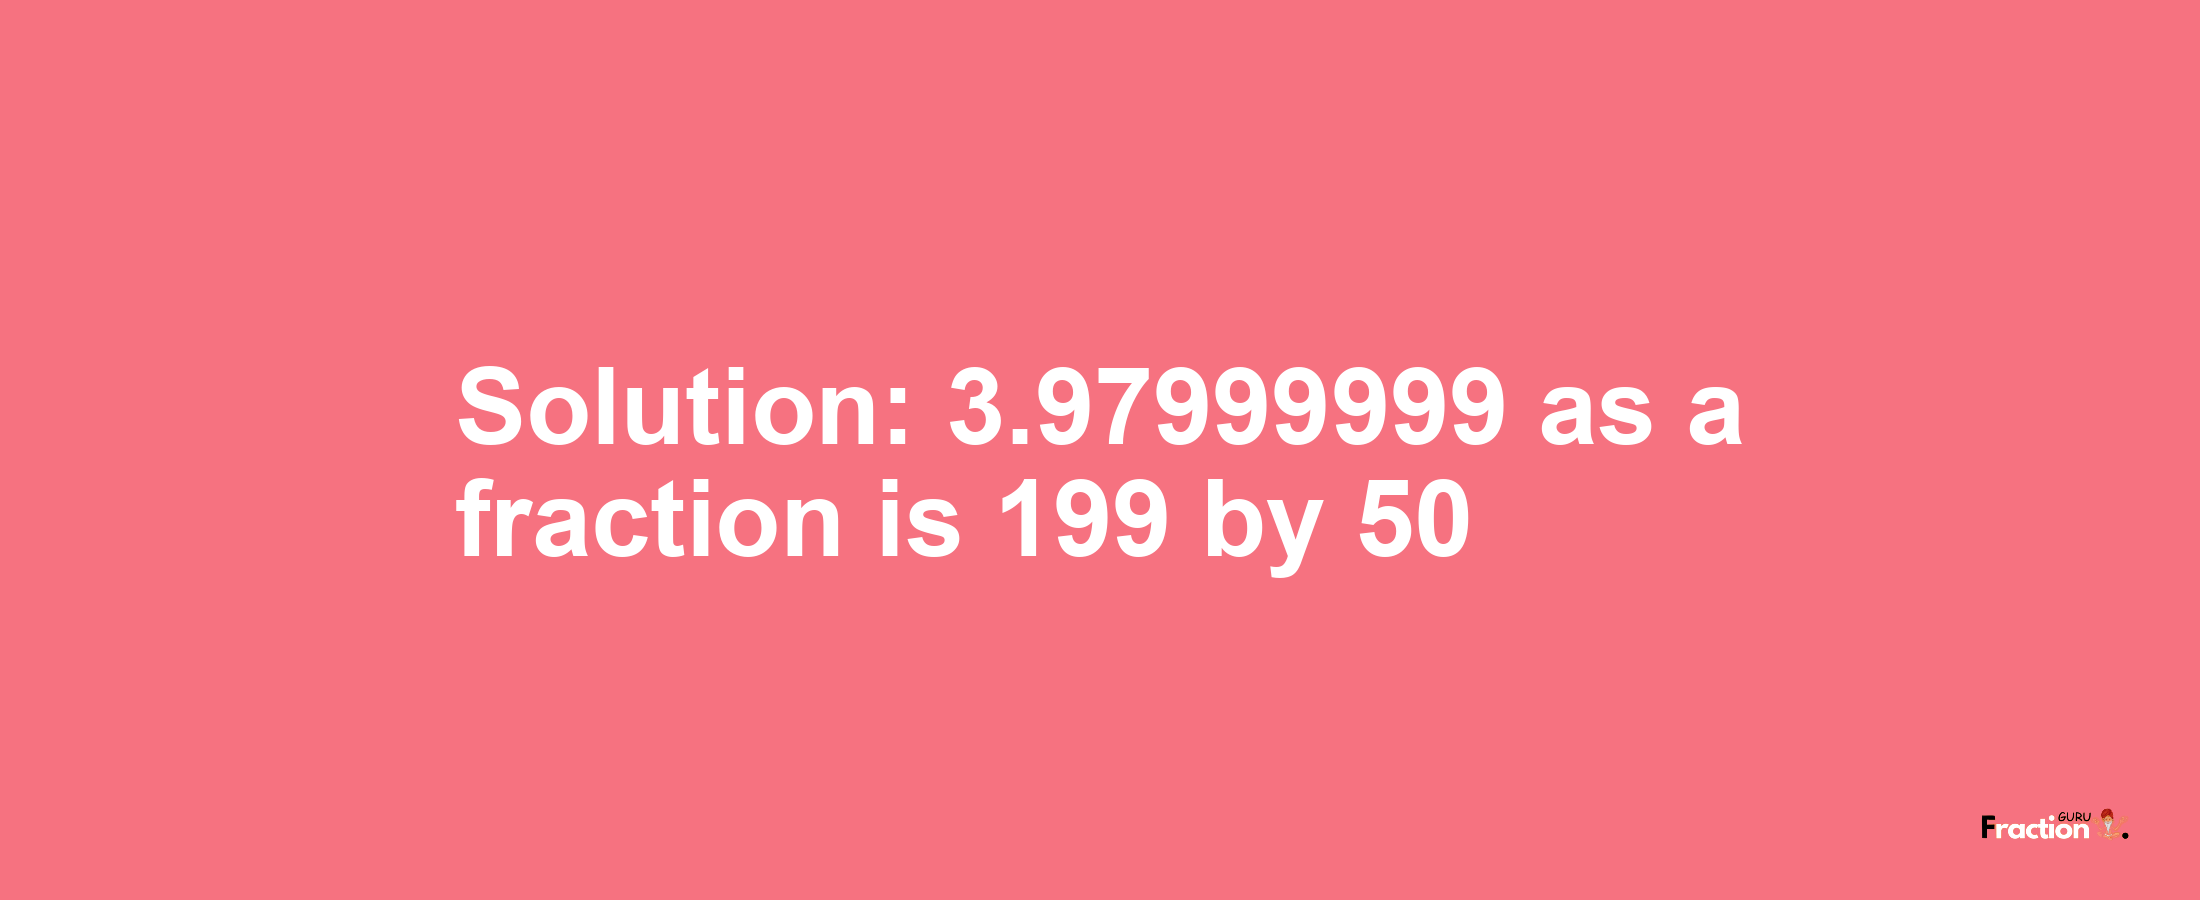 Solution:3.97999999 as a fraction is 199/50